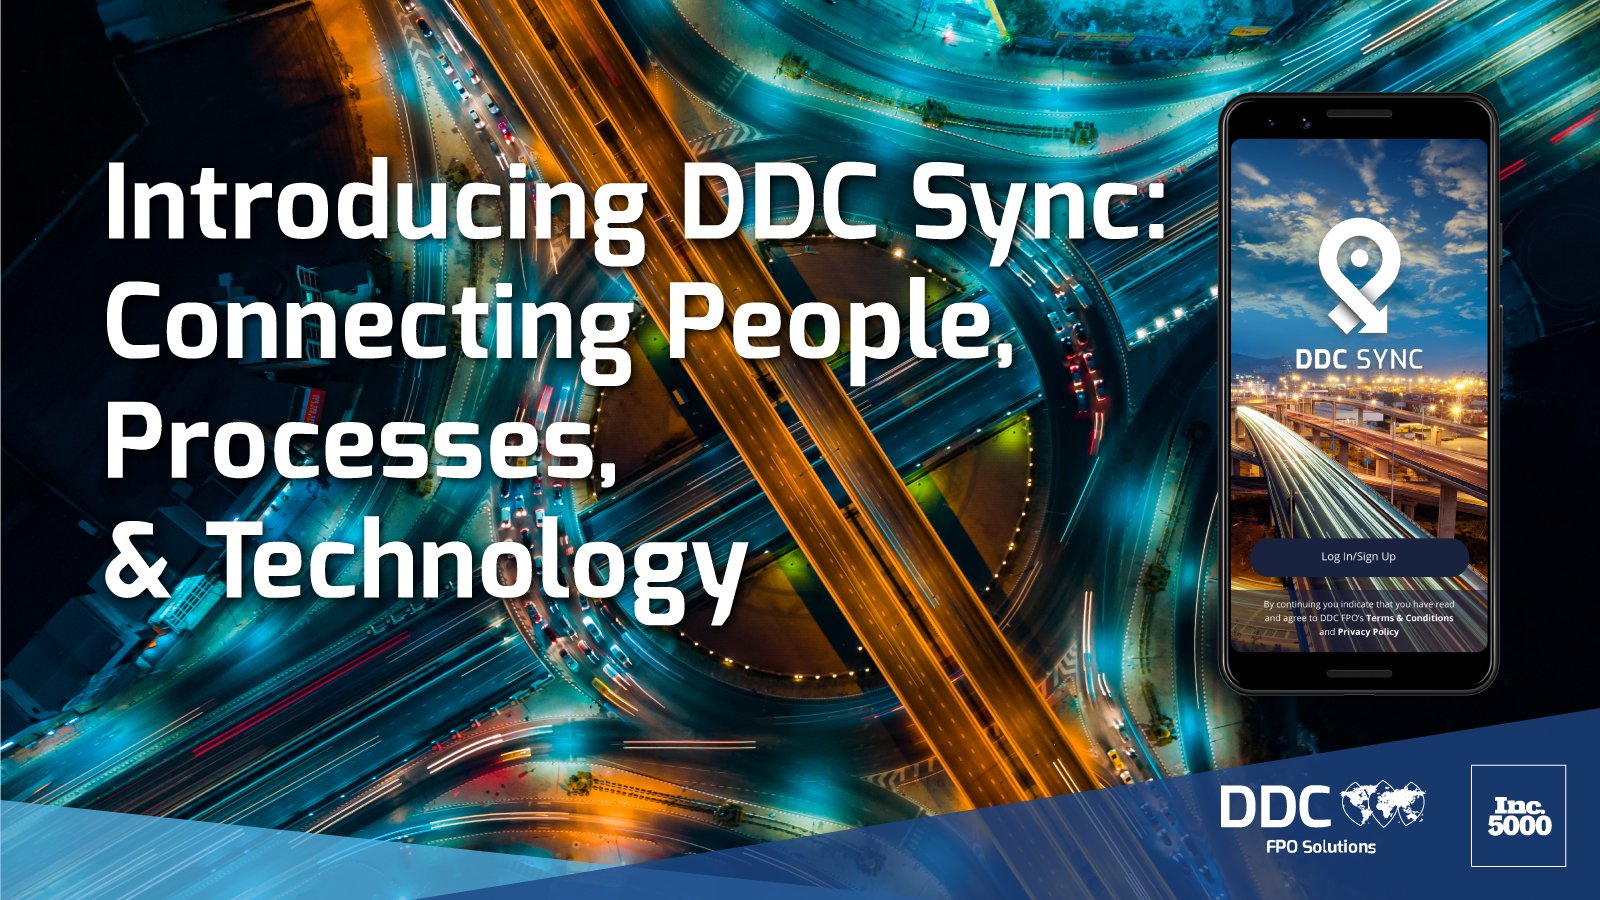 Introducing DDC Sync: Connecting People, Processes & Technology